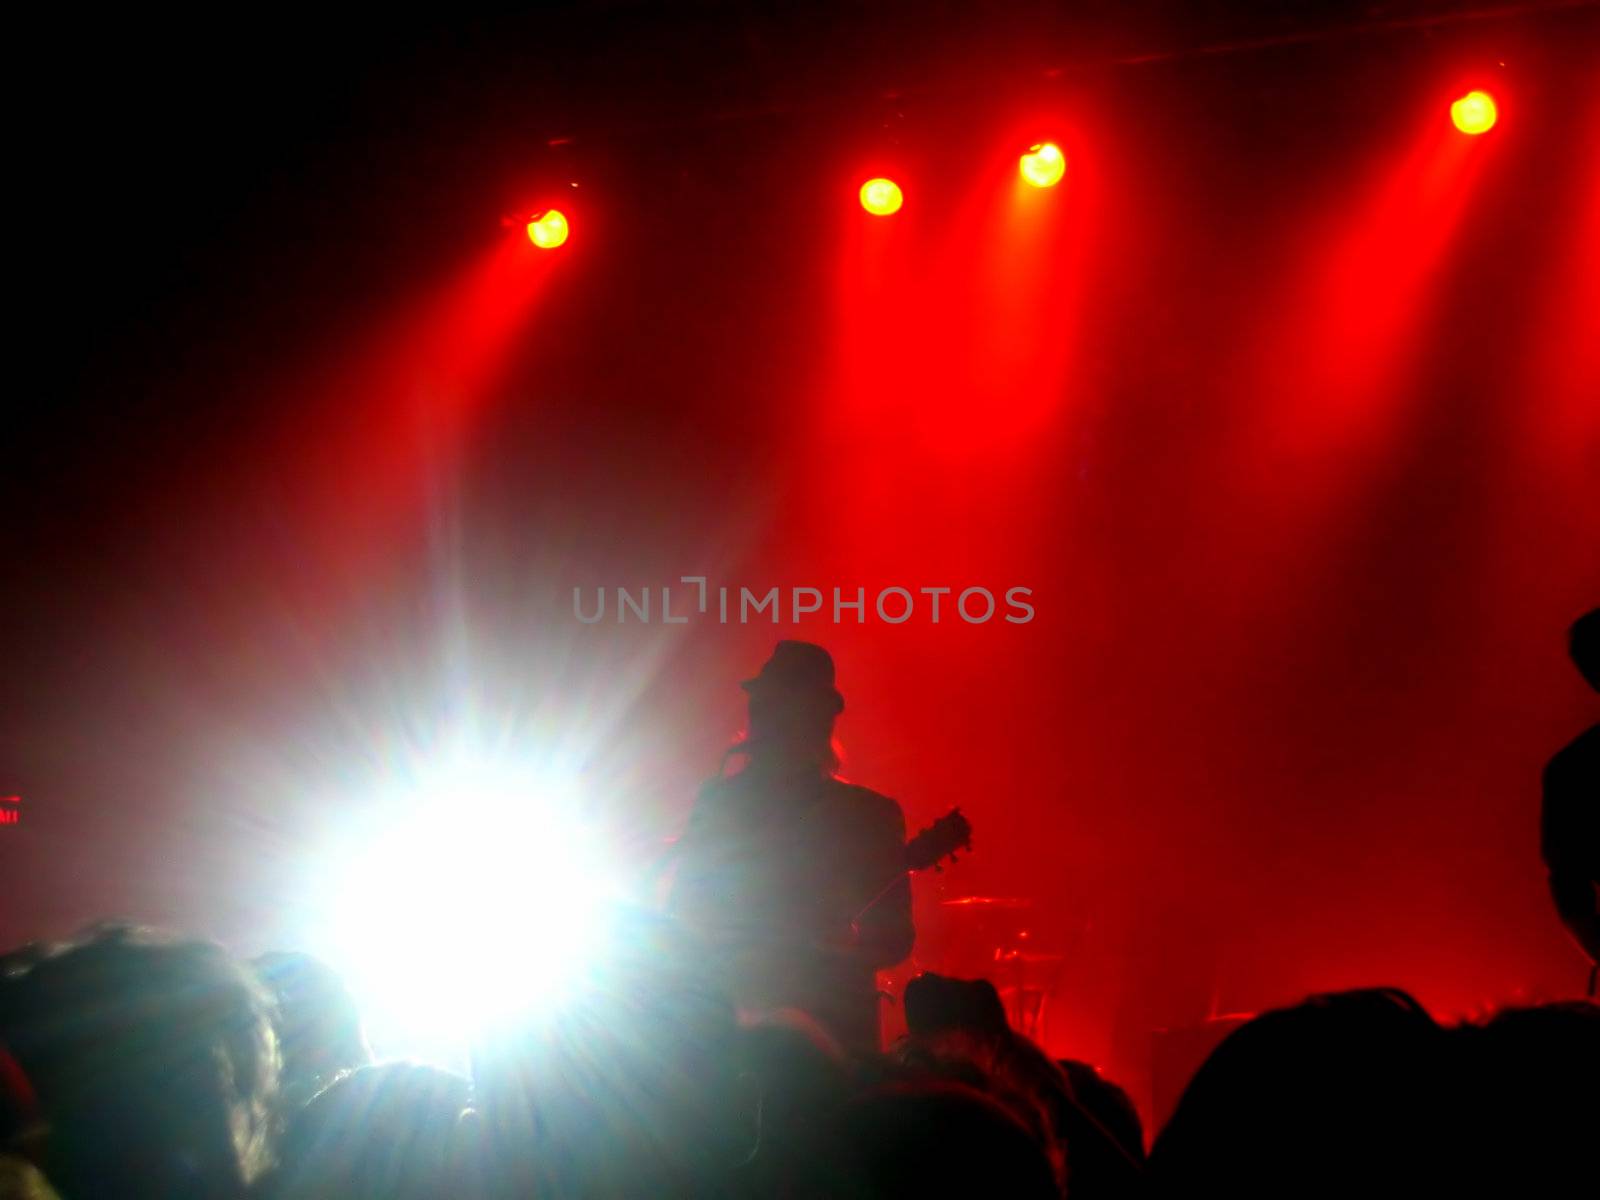 A cool shot at a rock concert - strobe lights going off made a nice lens flare.